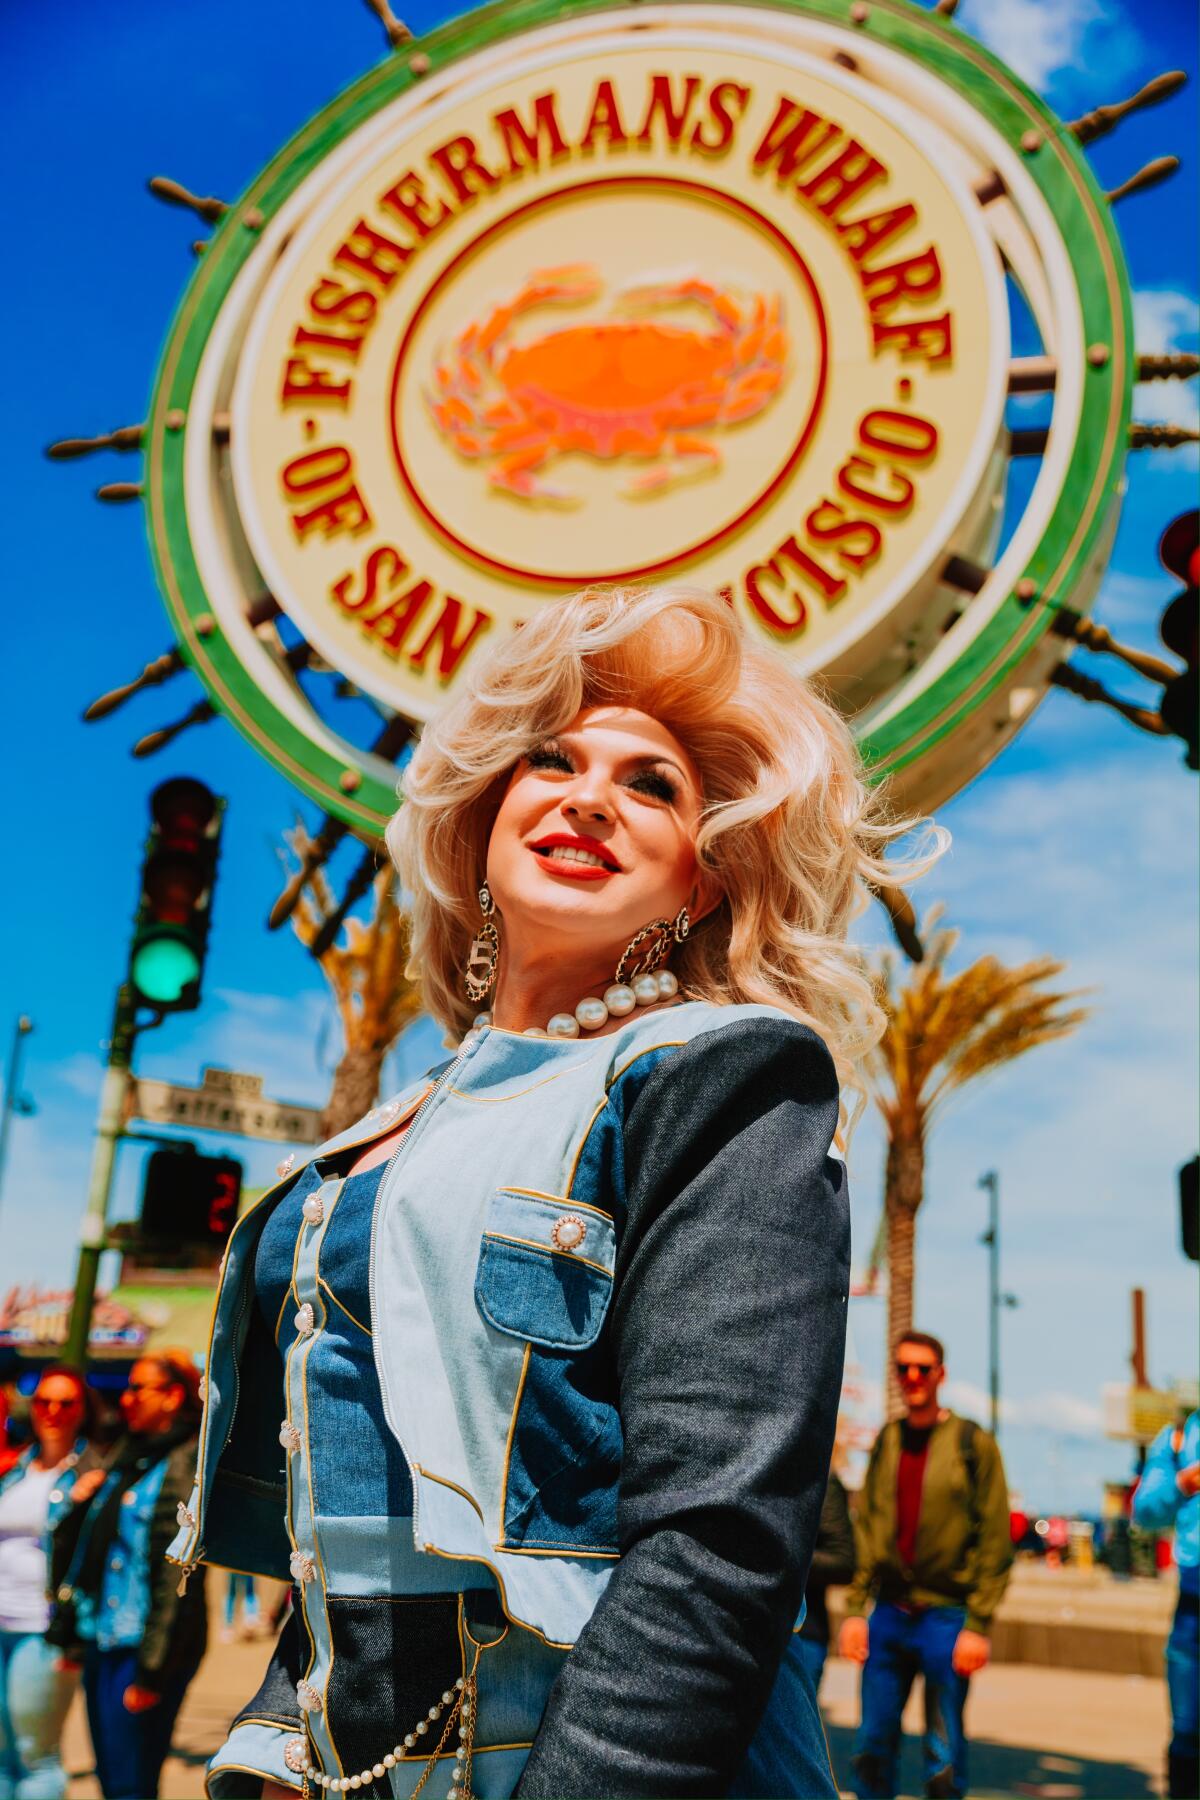 A person with blonde hair poses for. photo in front of a sign that reads "Fisherman's Wharf Of San Francisco."